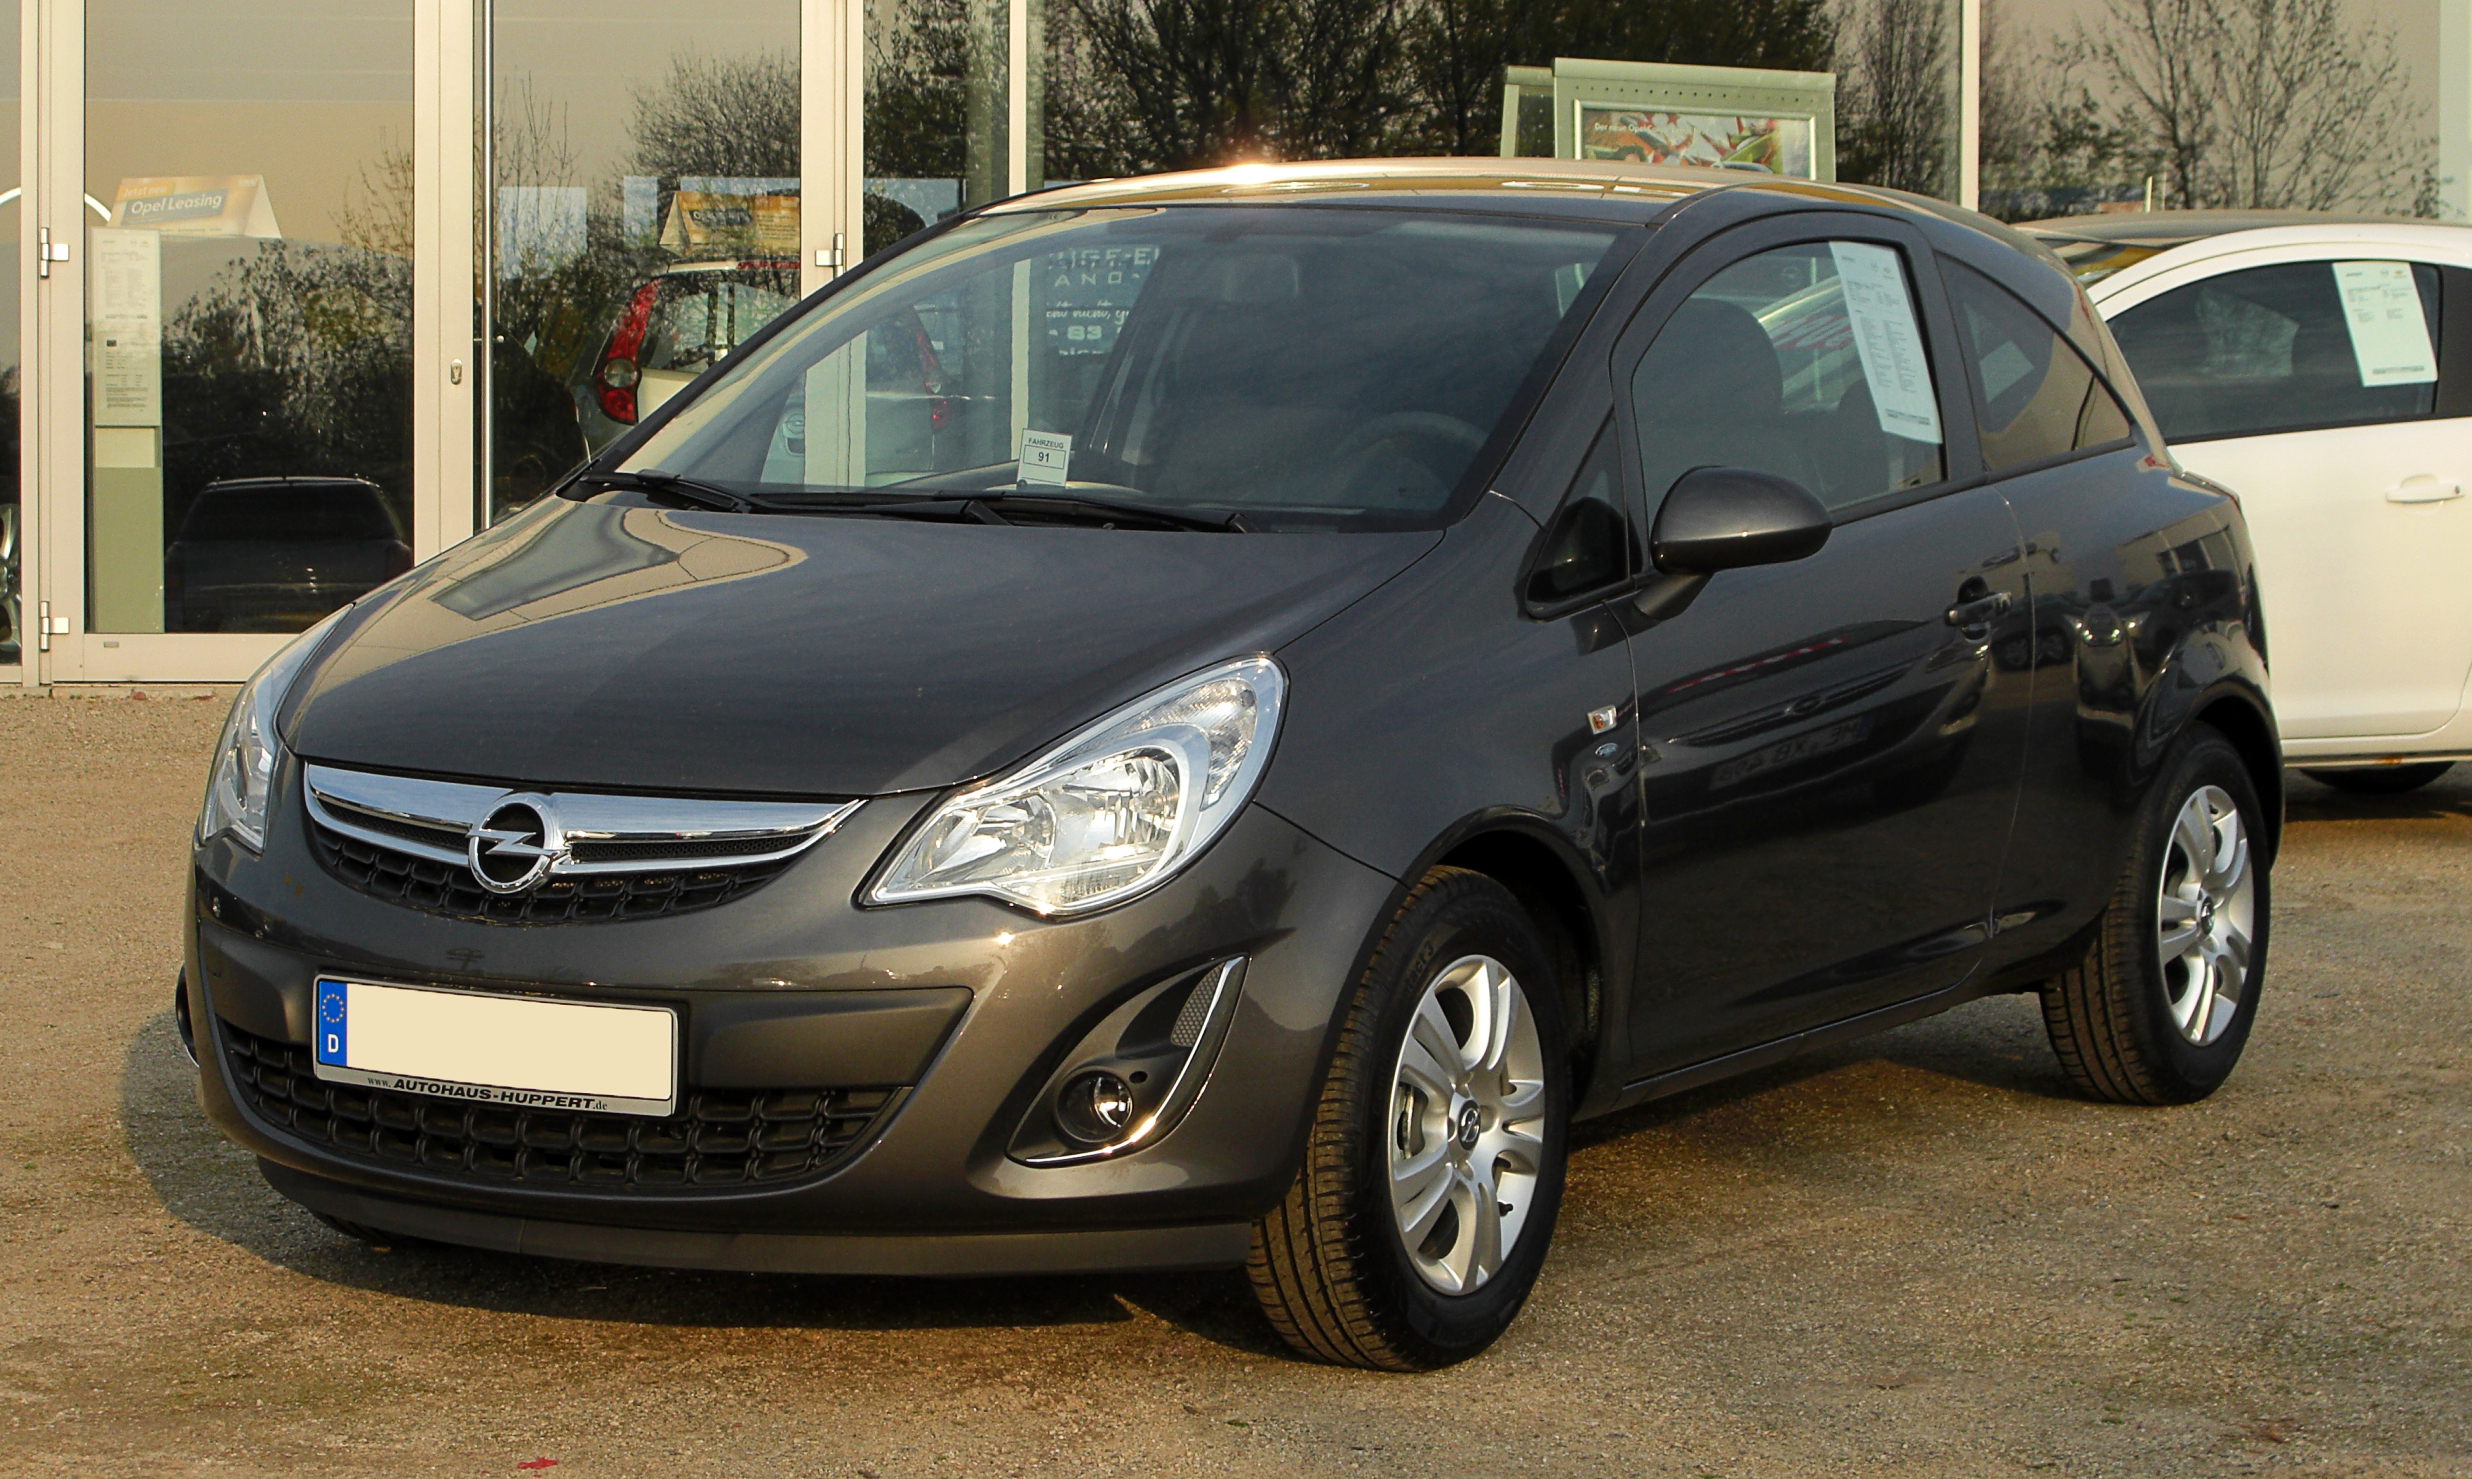 File:Opel Astra 1.6 Selection (G) – Frontansicht, 21. Juni 2011